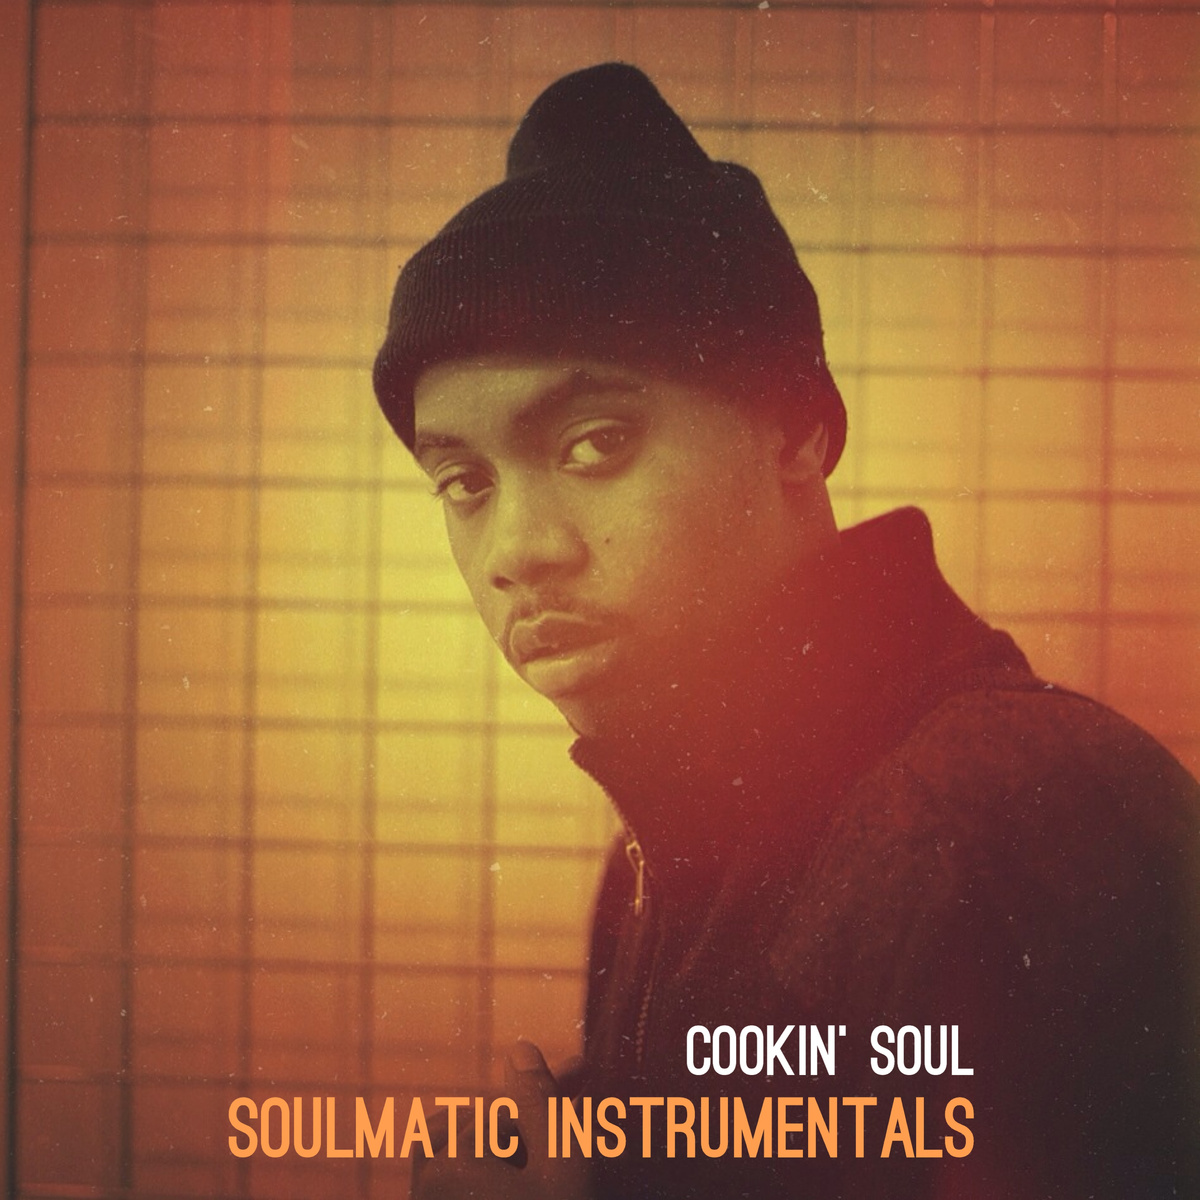 Cookin' Soul x Nas "SoulMatic Instrumentals" Mix | @CookinSoul